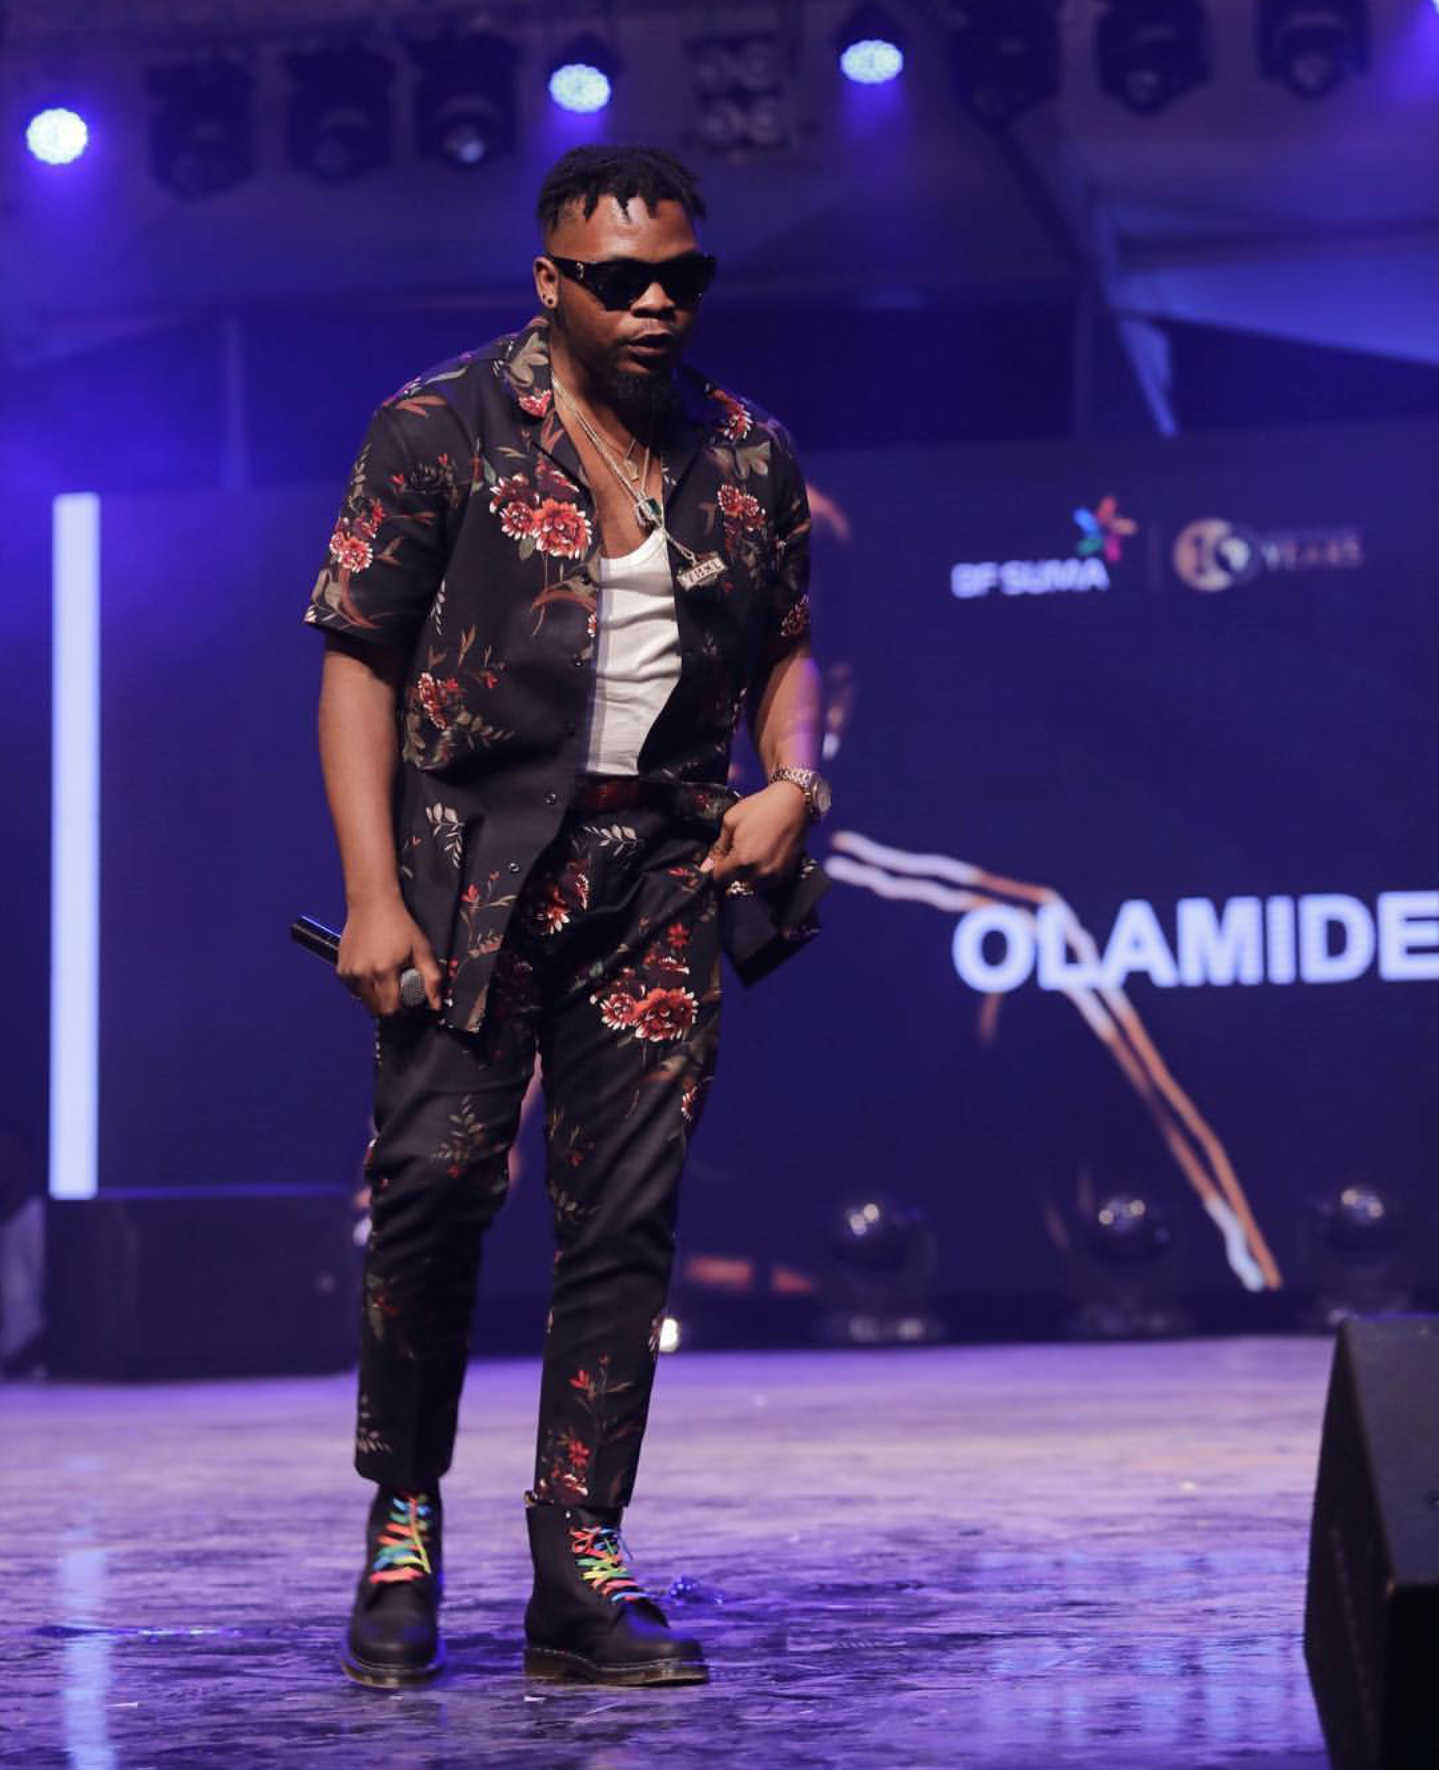 Olamide performing on stage at the BfsumaGhana concert